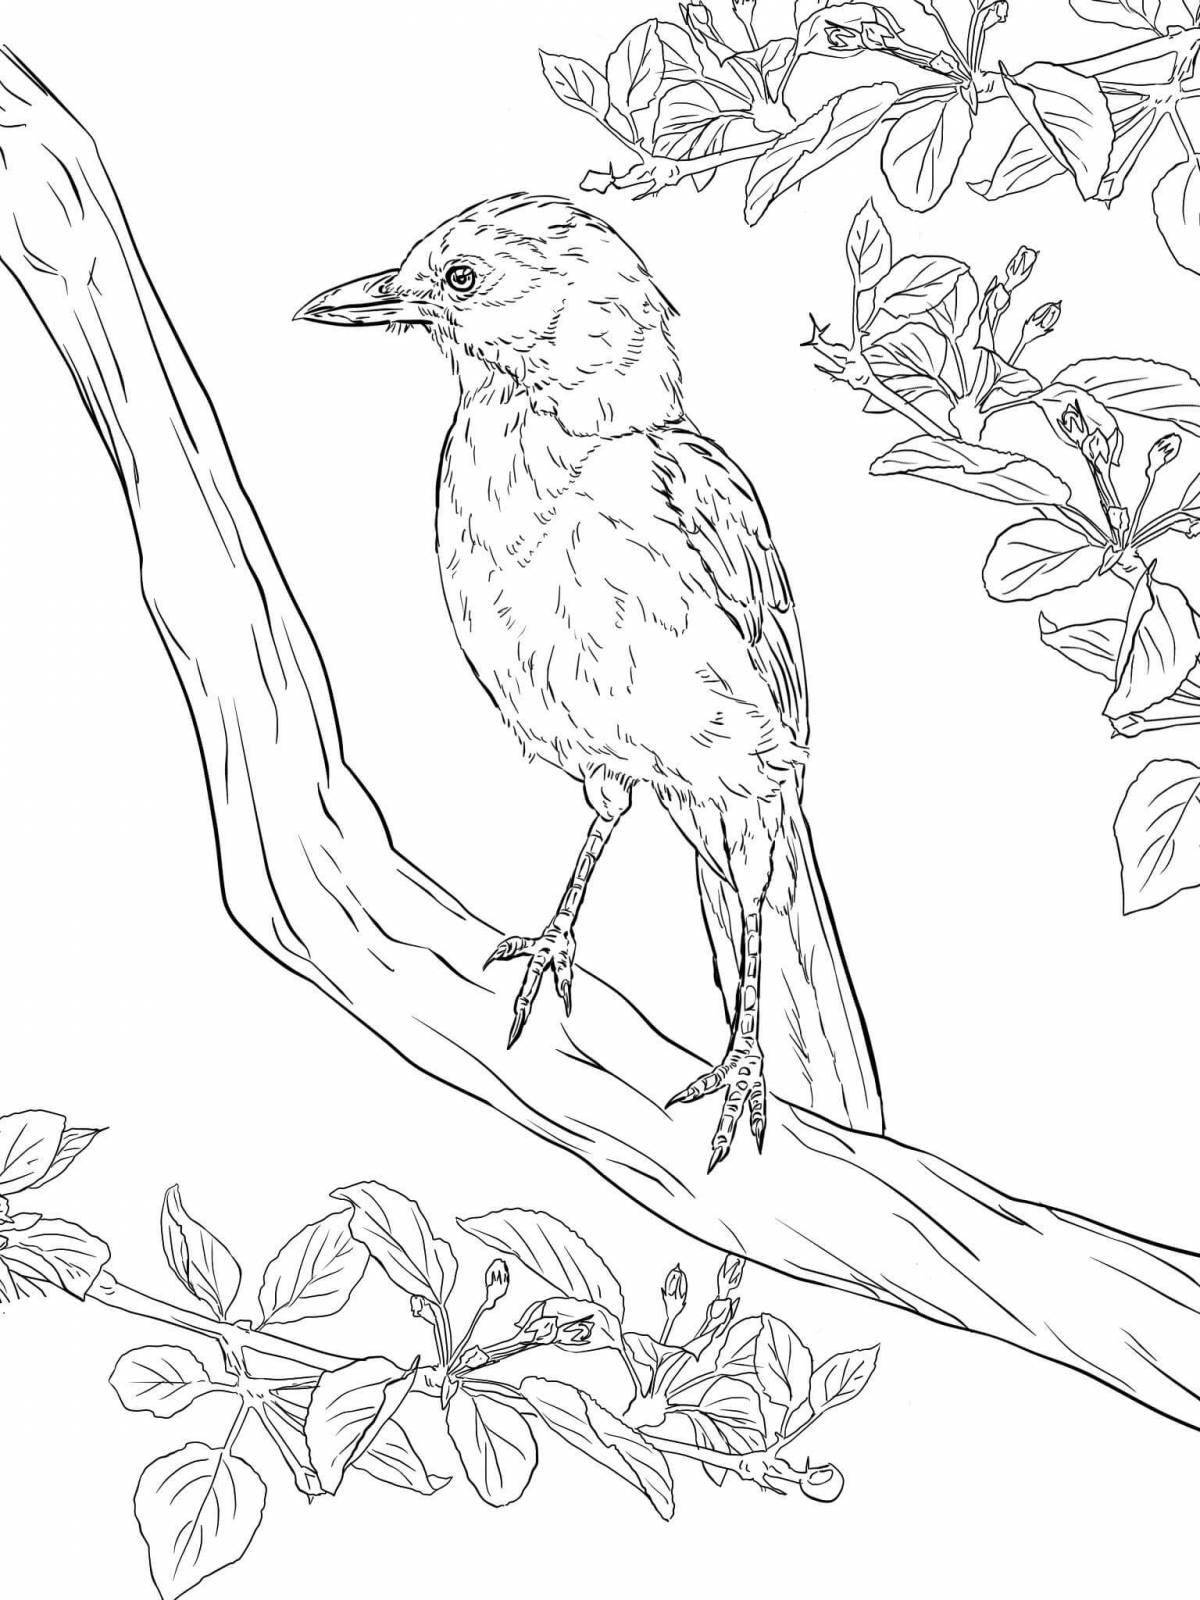 Exciting waxwing bird coloring page